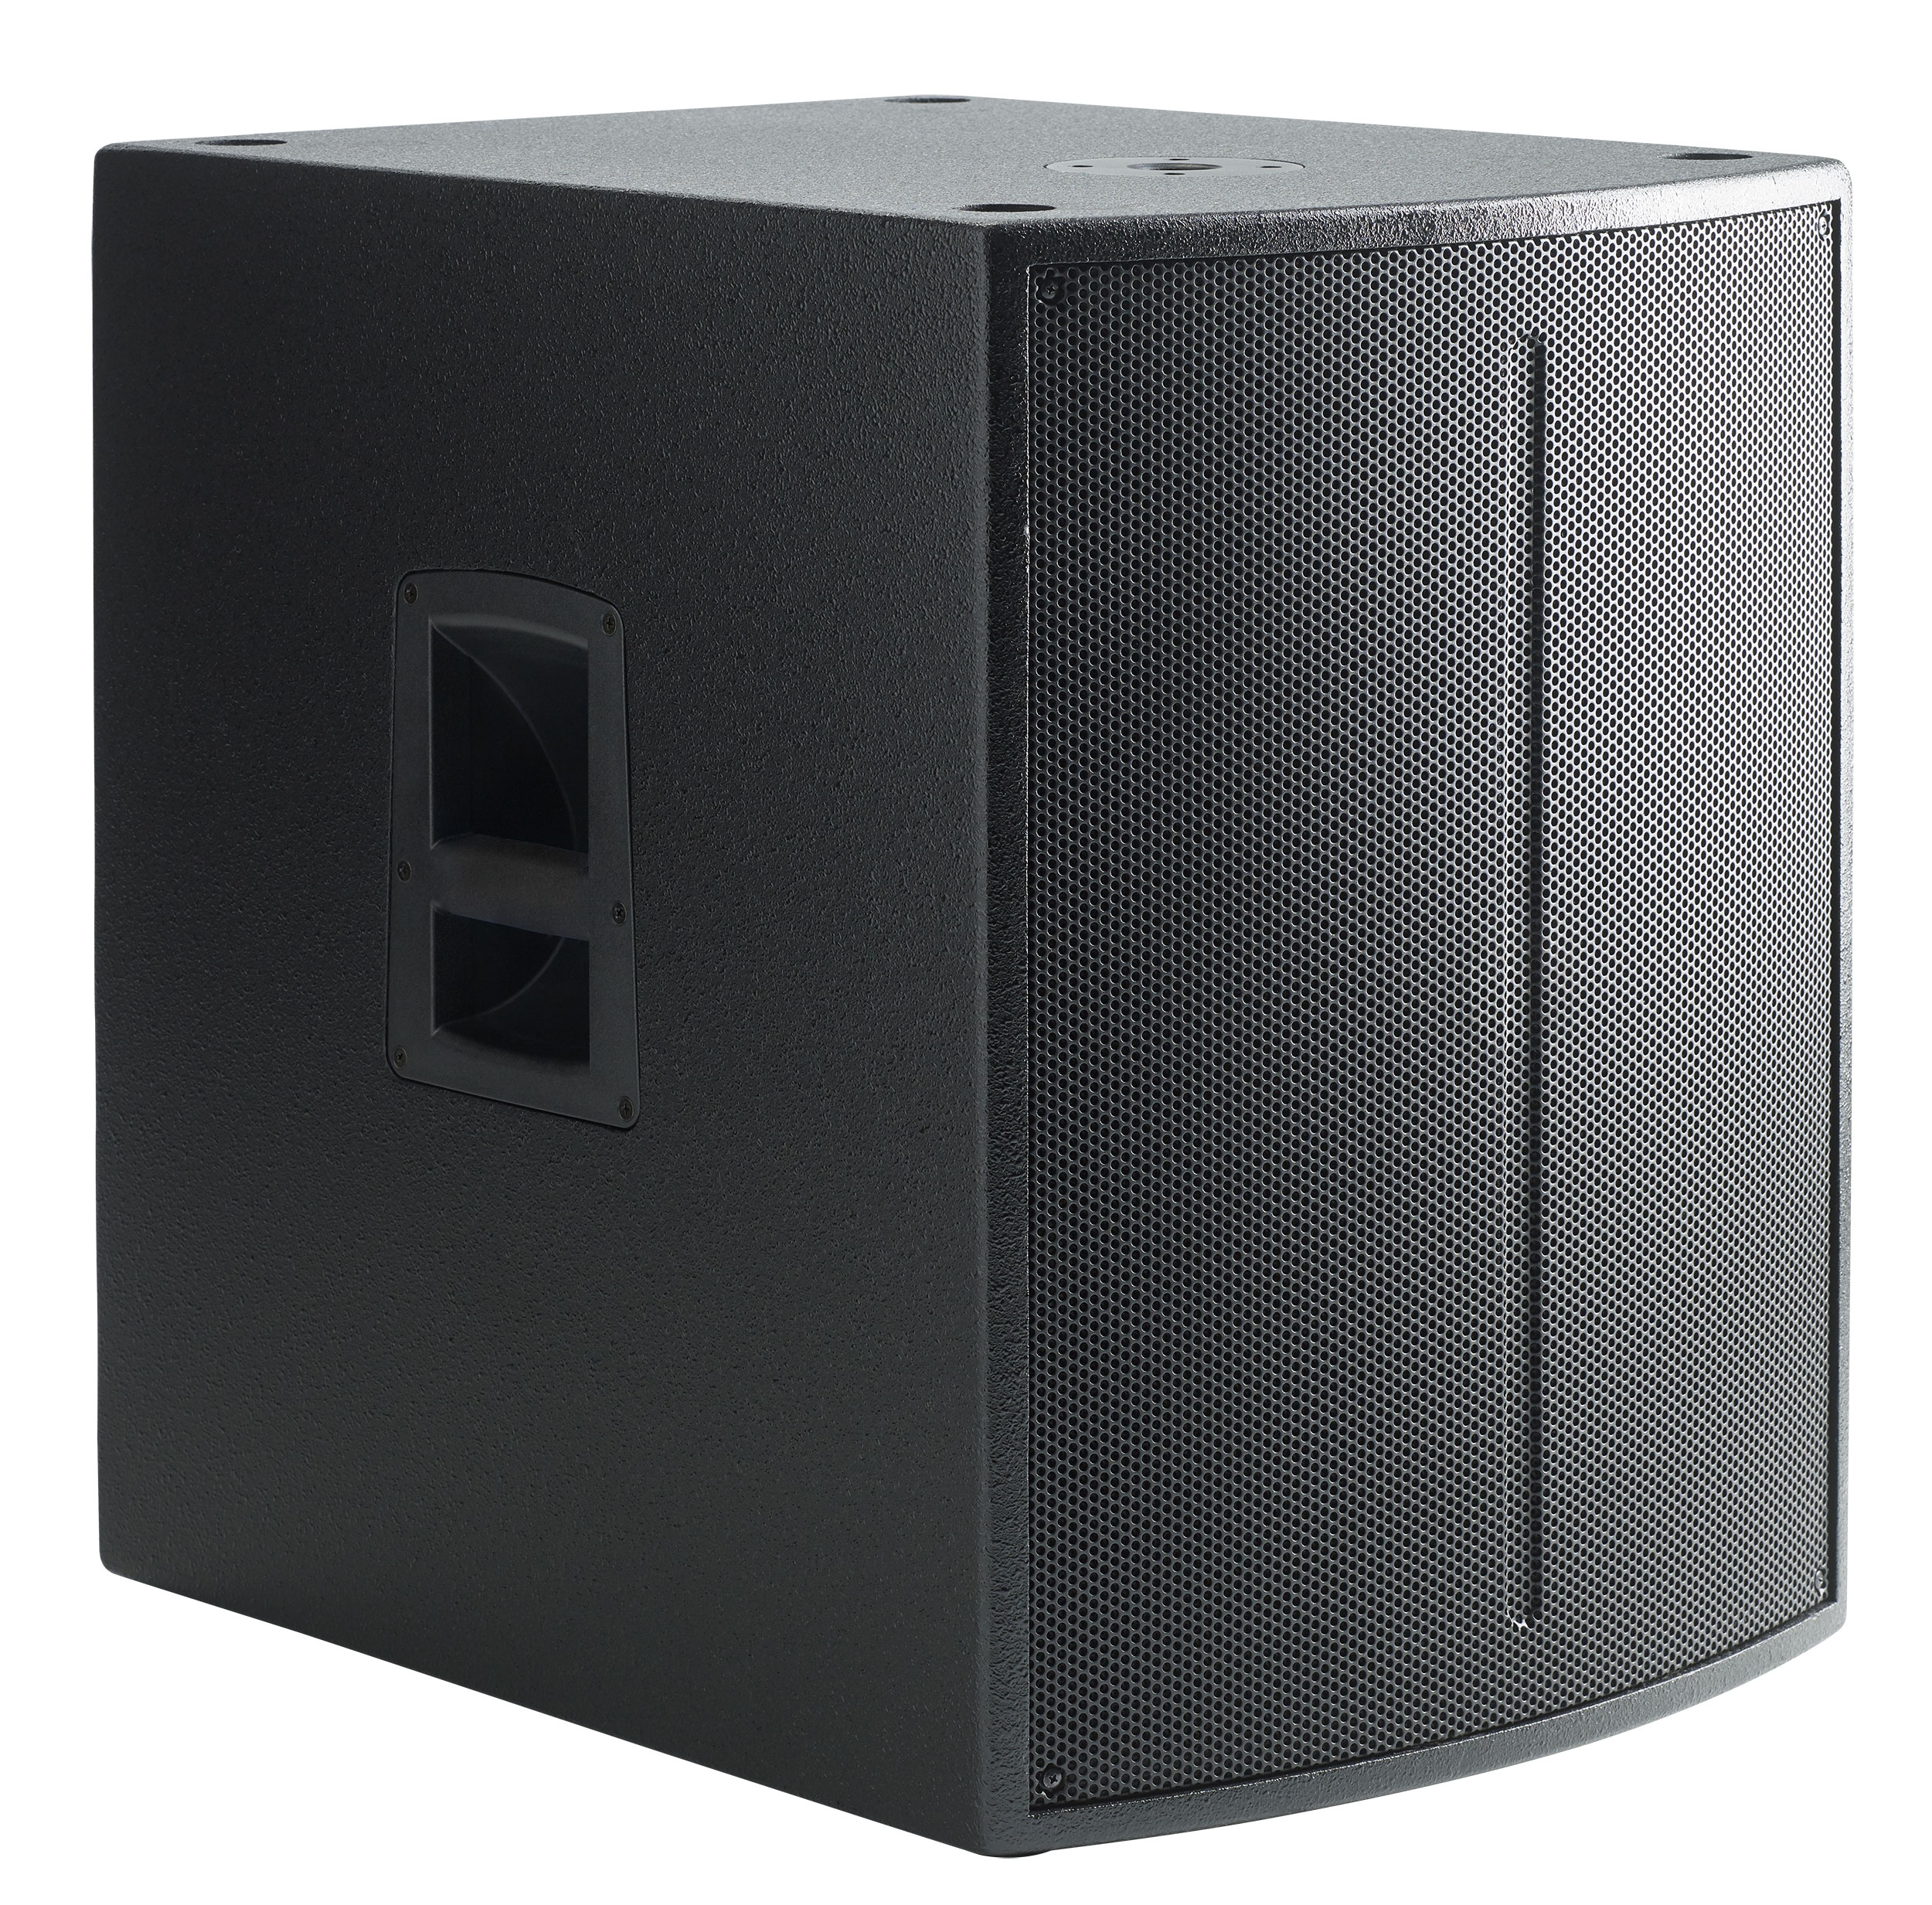 18" active subwoofer 600 Wrms with DSP